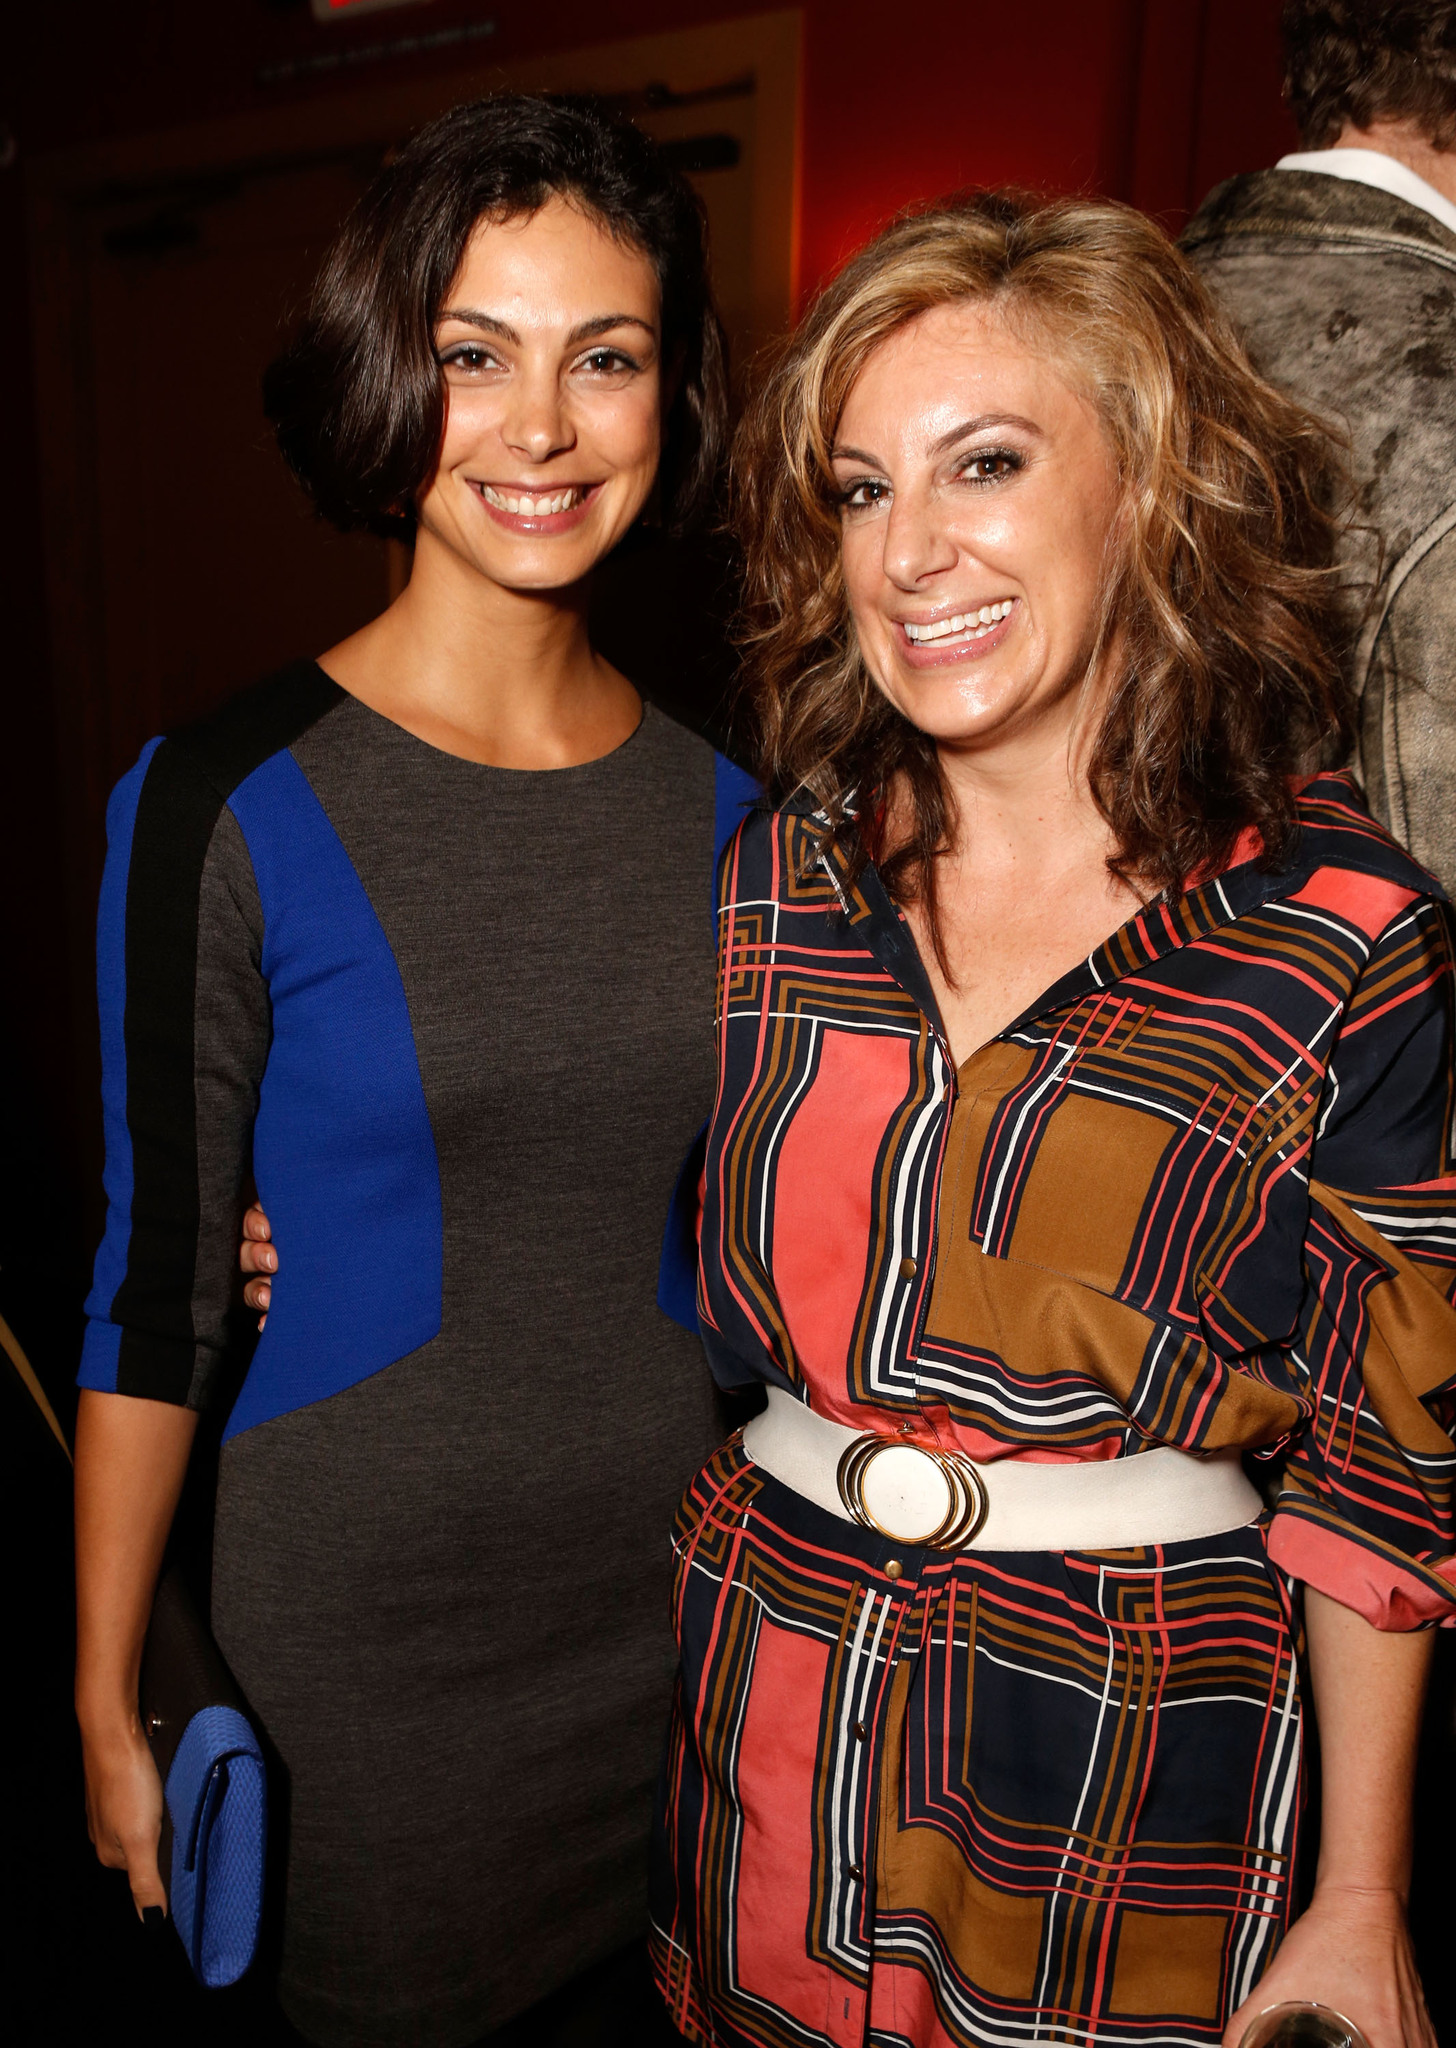 Kirsten Smith and Morena Baccarin at event of Apgaulinga aistra (2012)